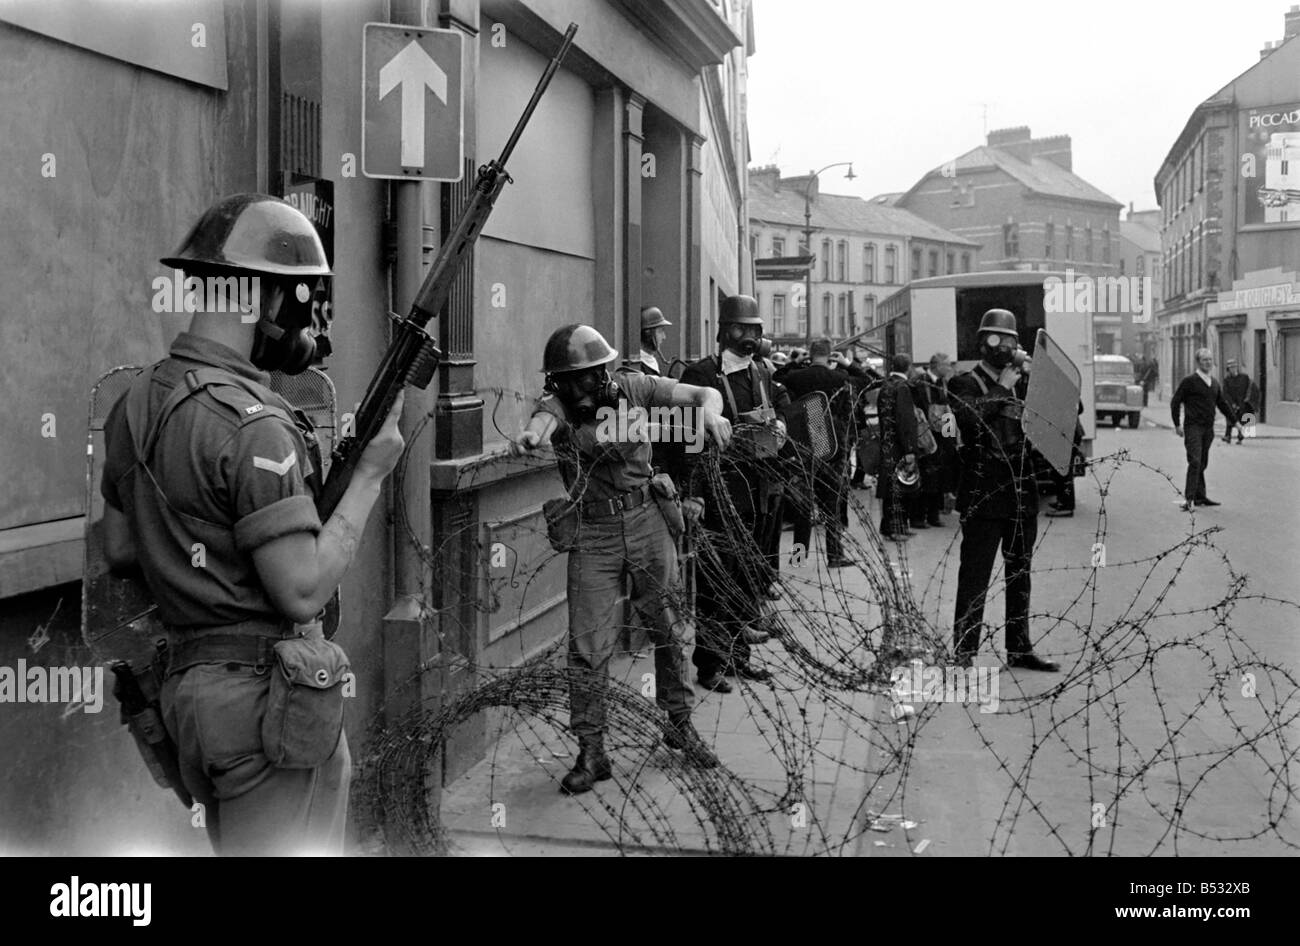 Northern Ireland Aug. 1969. Elements of the British Army are deployed to the streets of Londonderry to support the R.U.C as riot Stock Photo